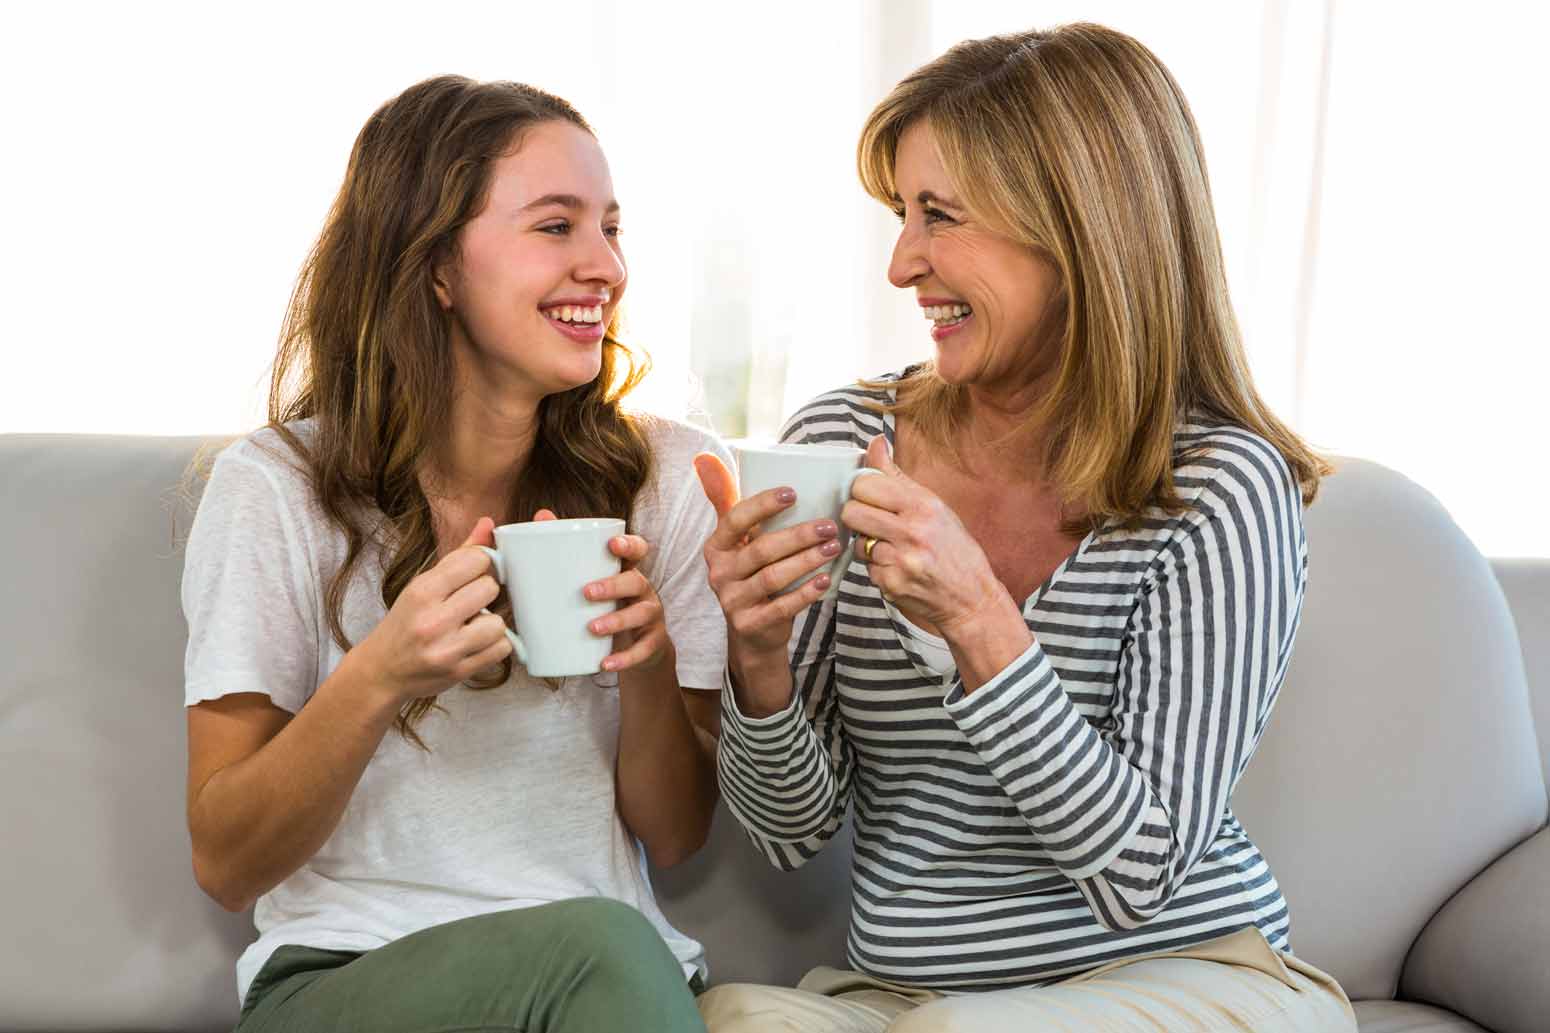 mother-in-law and daughter sitting next to eachother on the couch drinking coffee and smiling and trying to build peaceful relationships